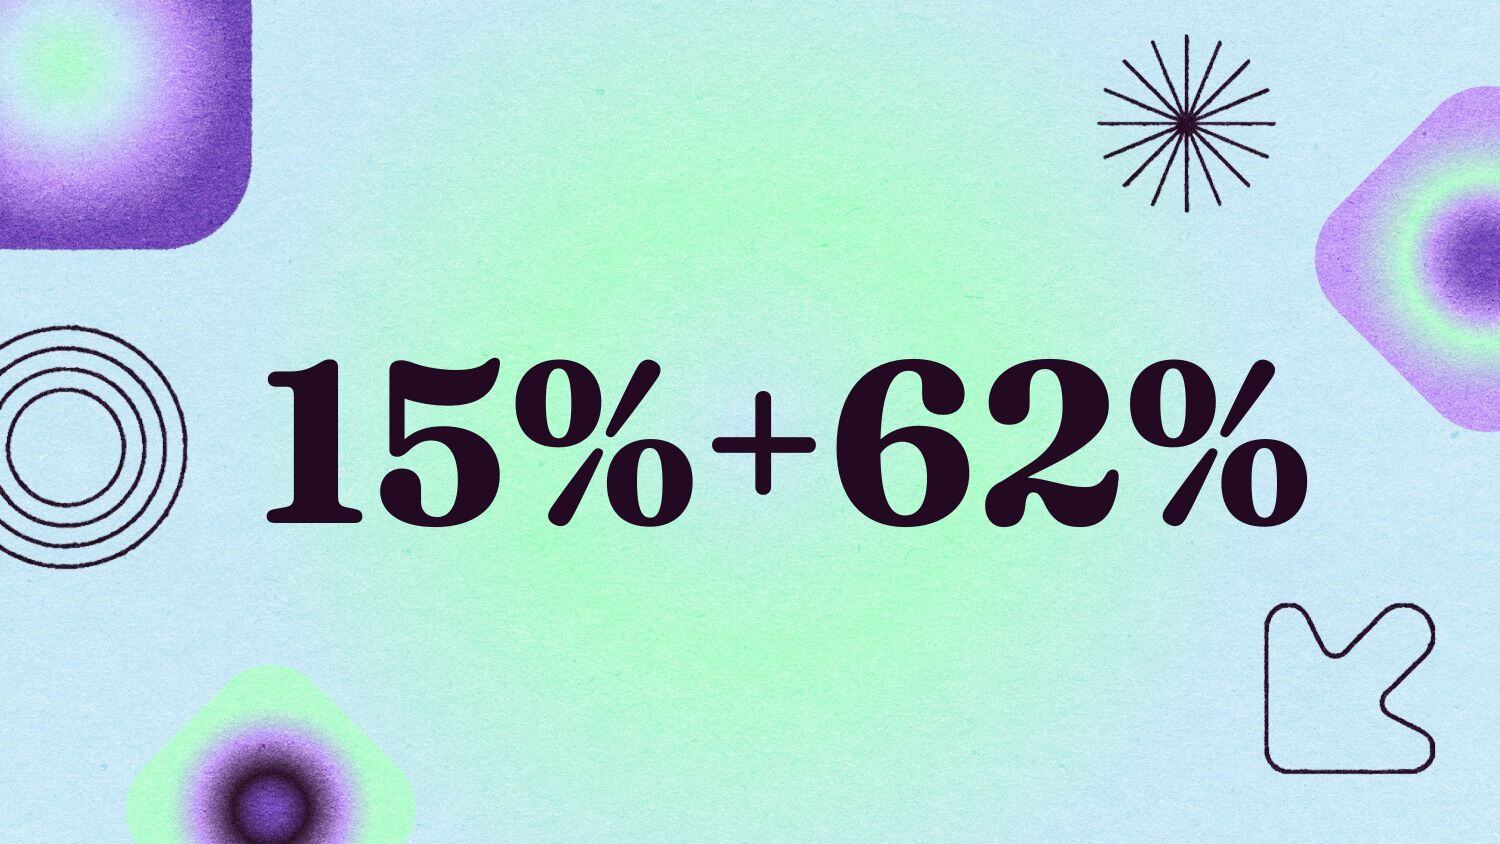 Graphic with the text '15% + 62%' 